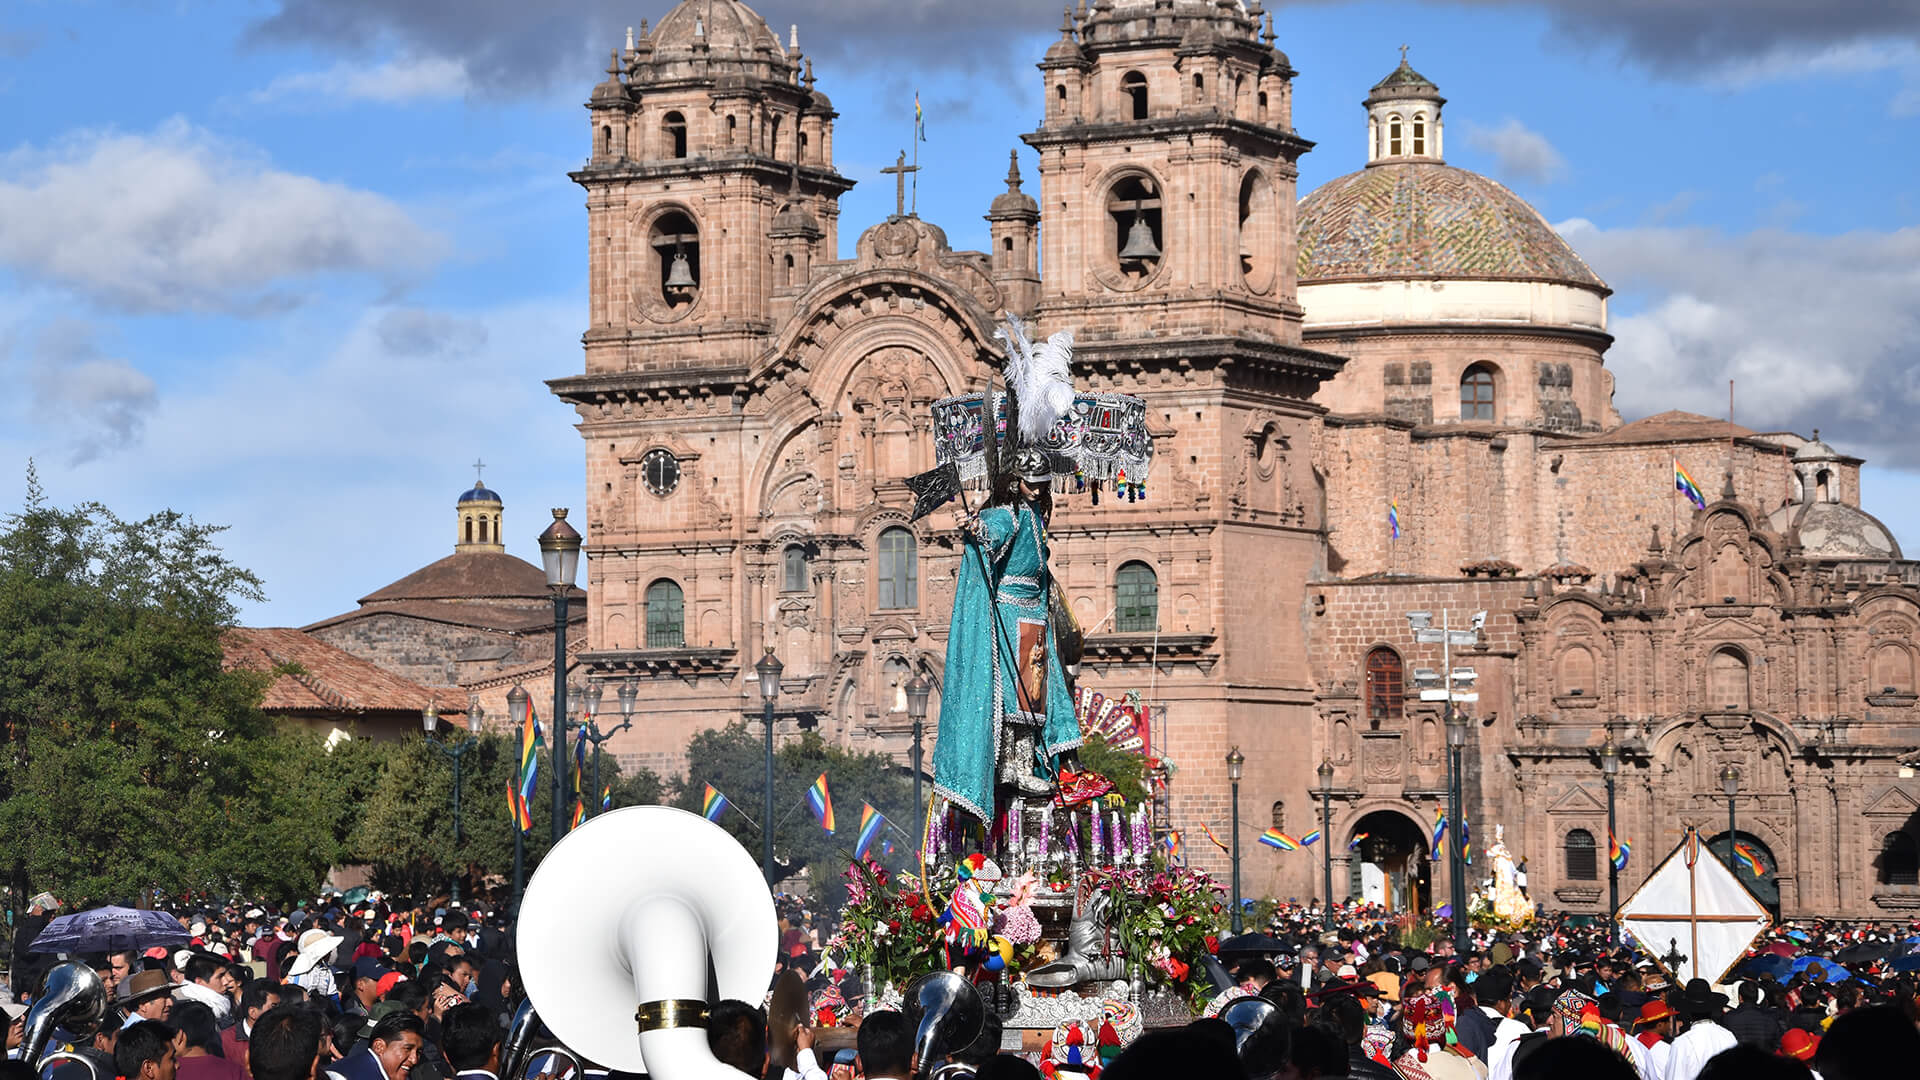 A festivity taking place in the Plaza de Armas (Main square) of Cusco with The Church of the Company of Jesus in the back